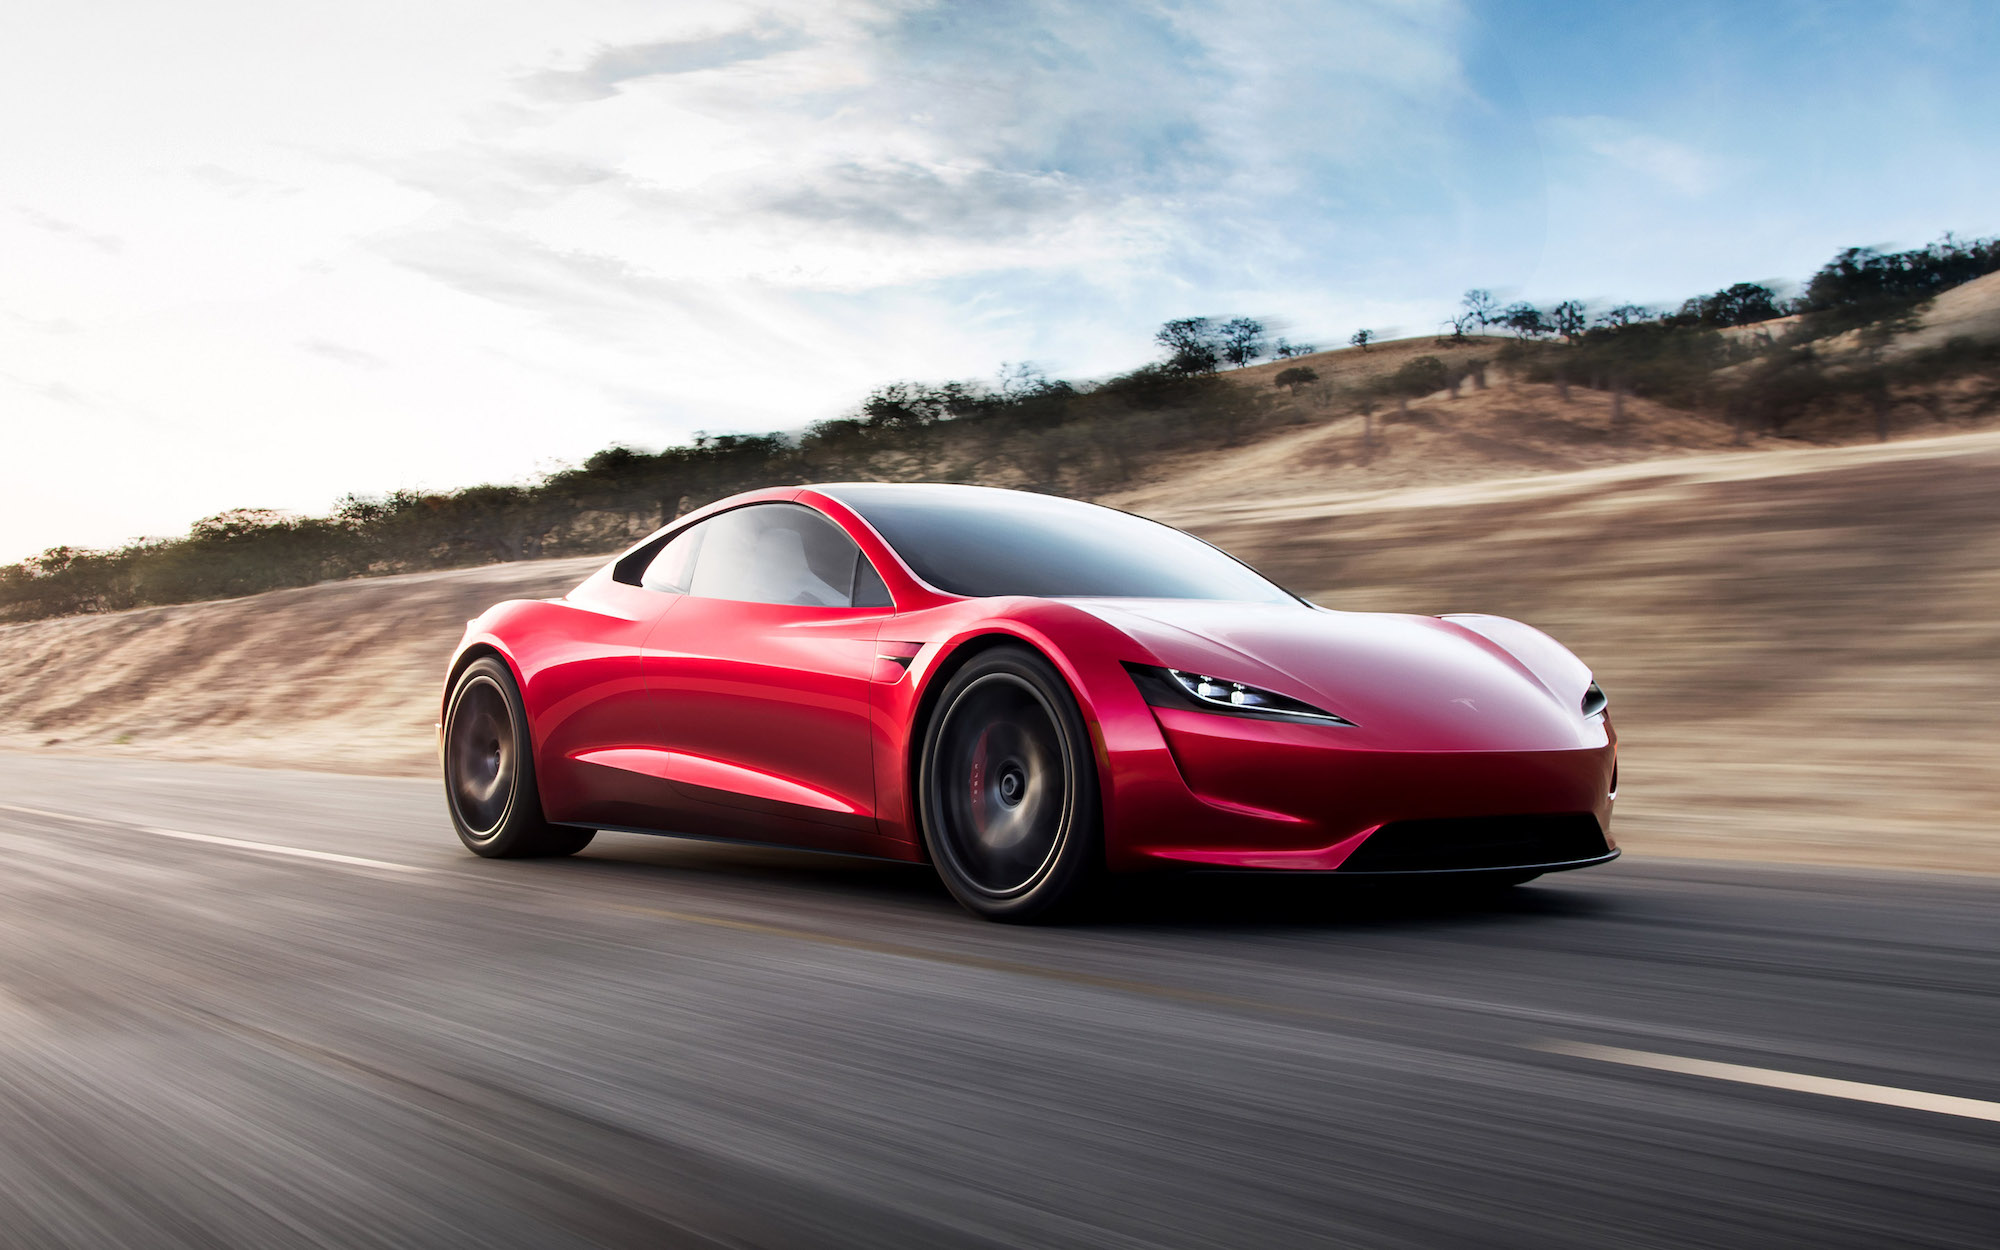 A red Tesla Roadster travels on a highway along brown hills dotted with trees